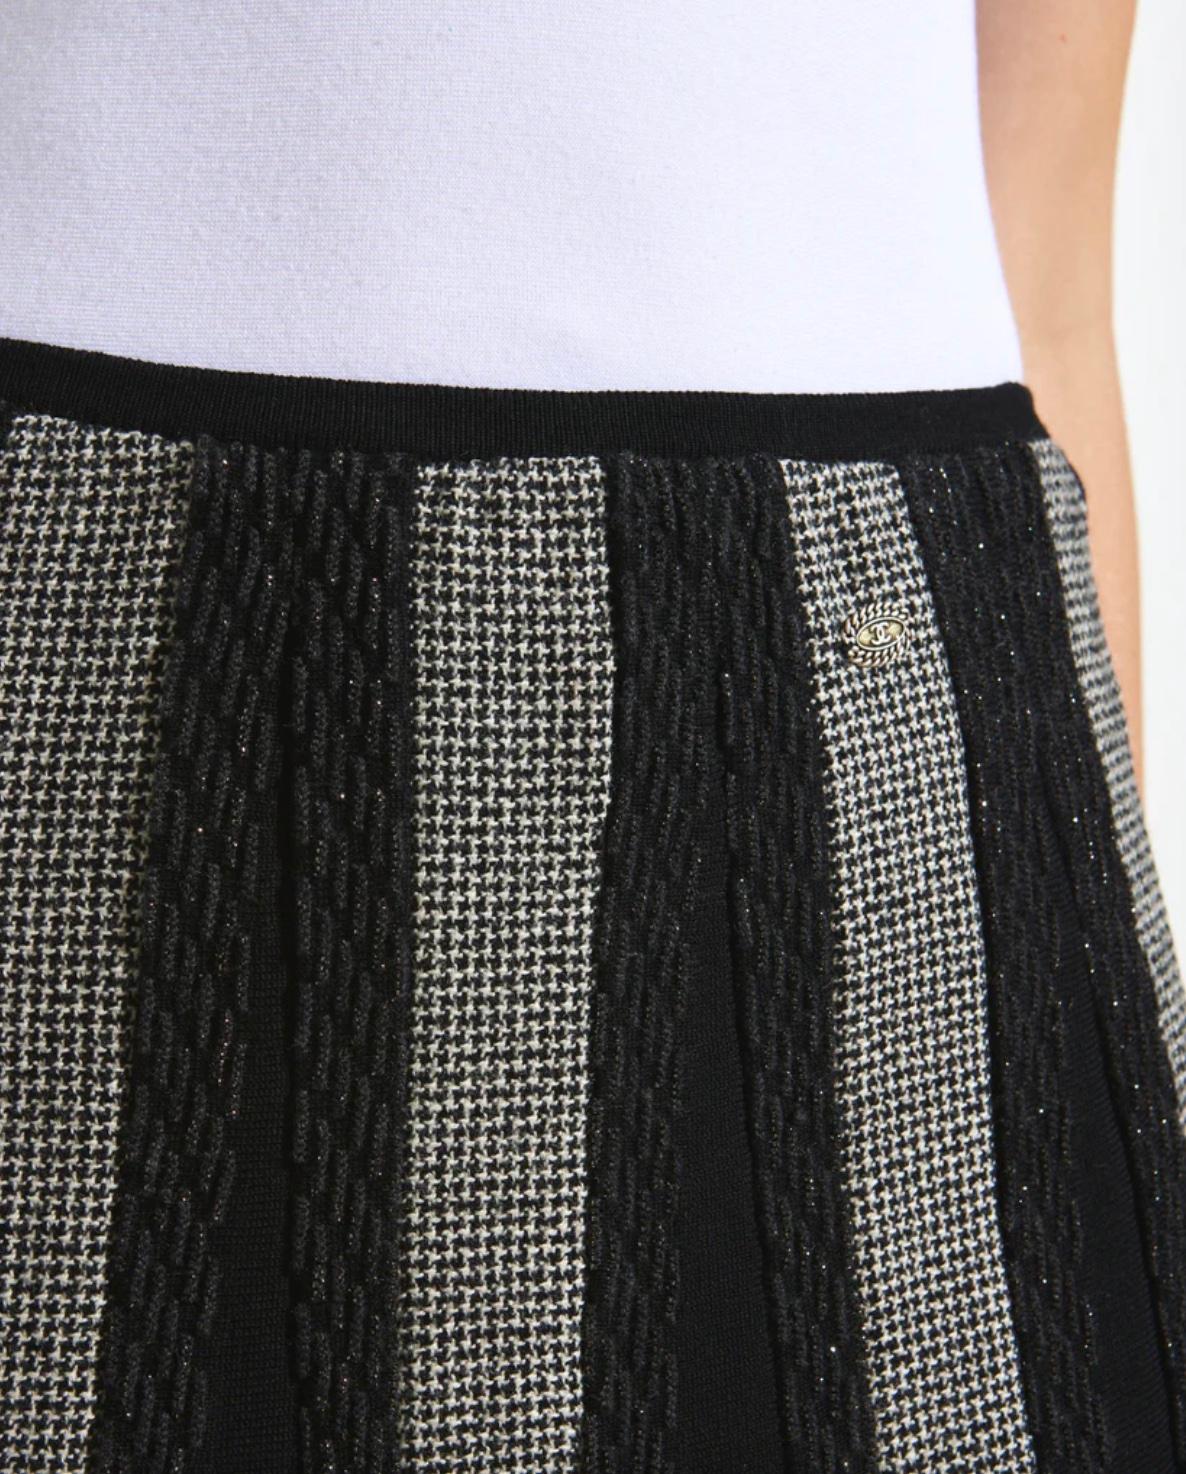 Chanel Pre-Fall 2005 Knit Skirt In Excellent Condition For Sale In New York, NY